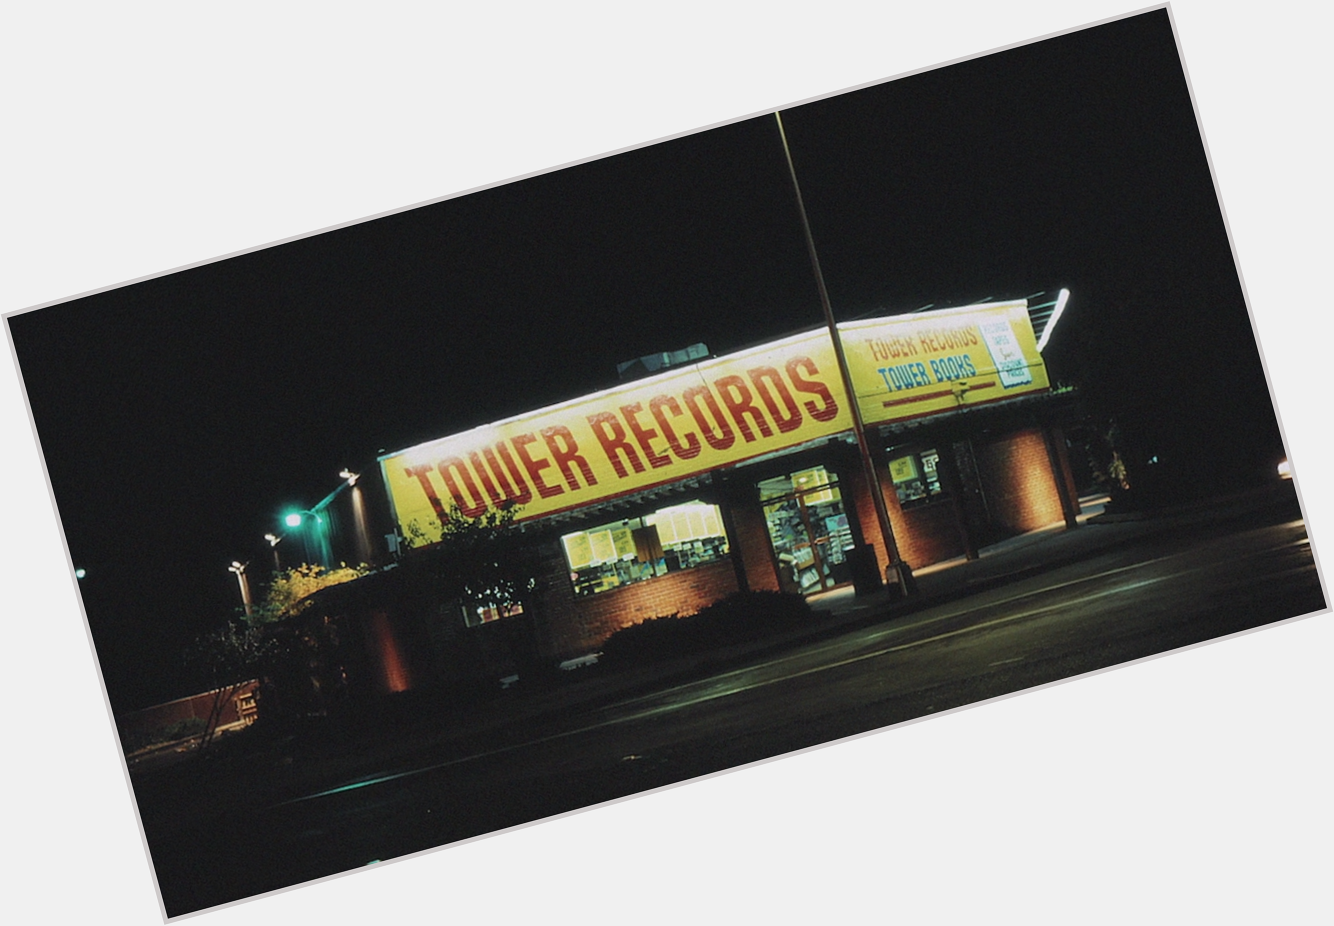 Happy Bday Colin Hanks,director of ALL THINGS MUST PASS: THE RISE AND FALL OF TOWER RECORDS!  